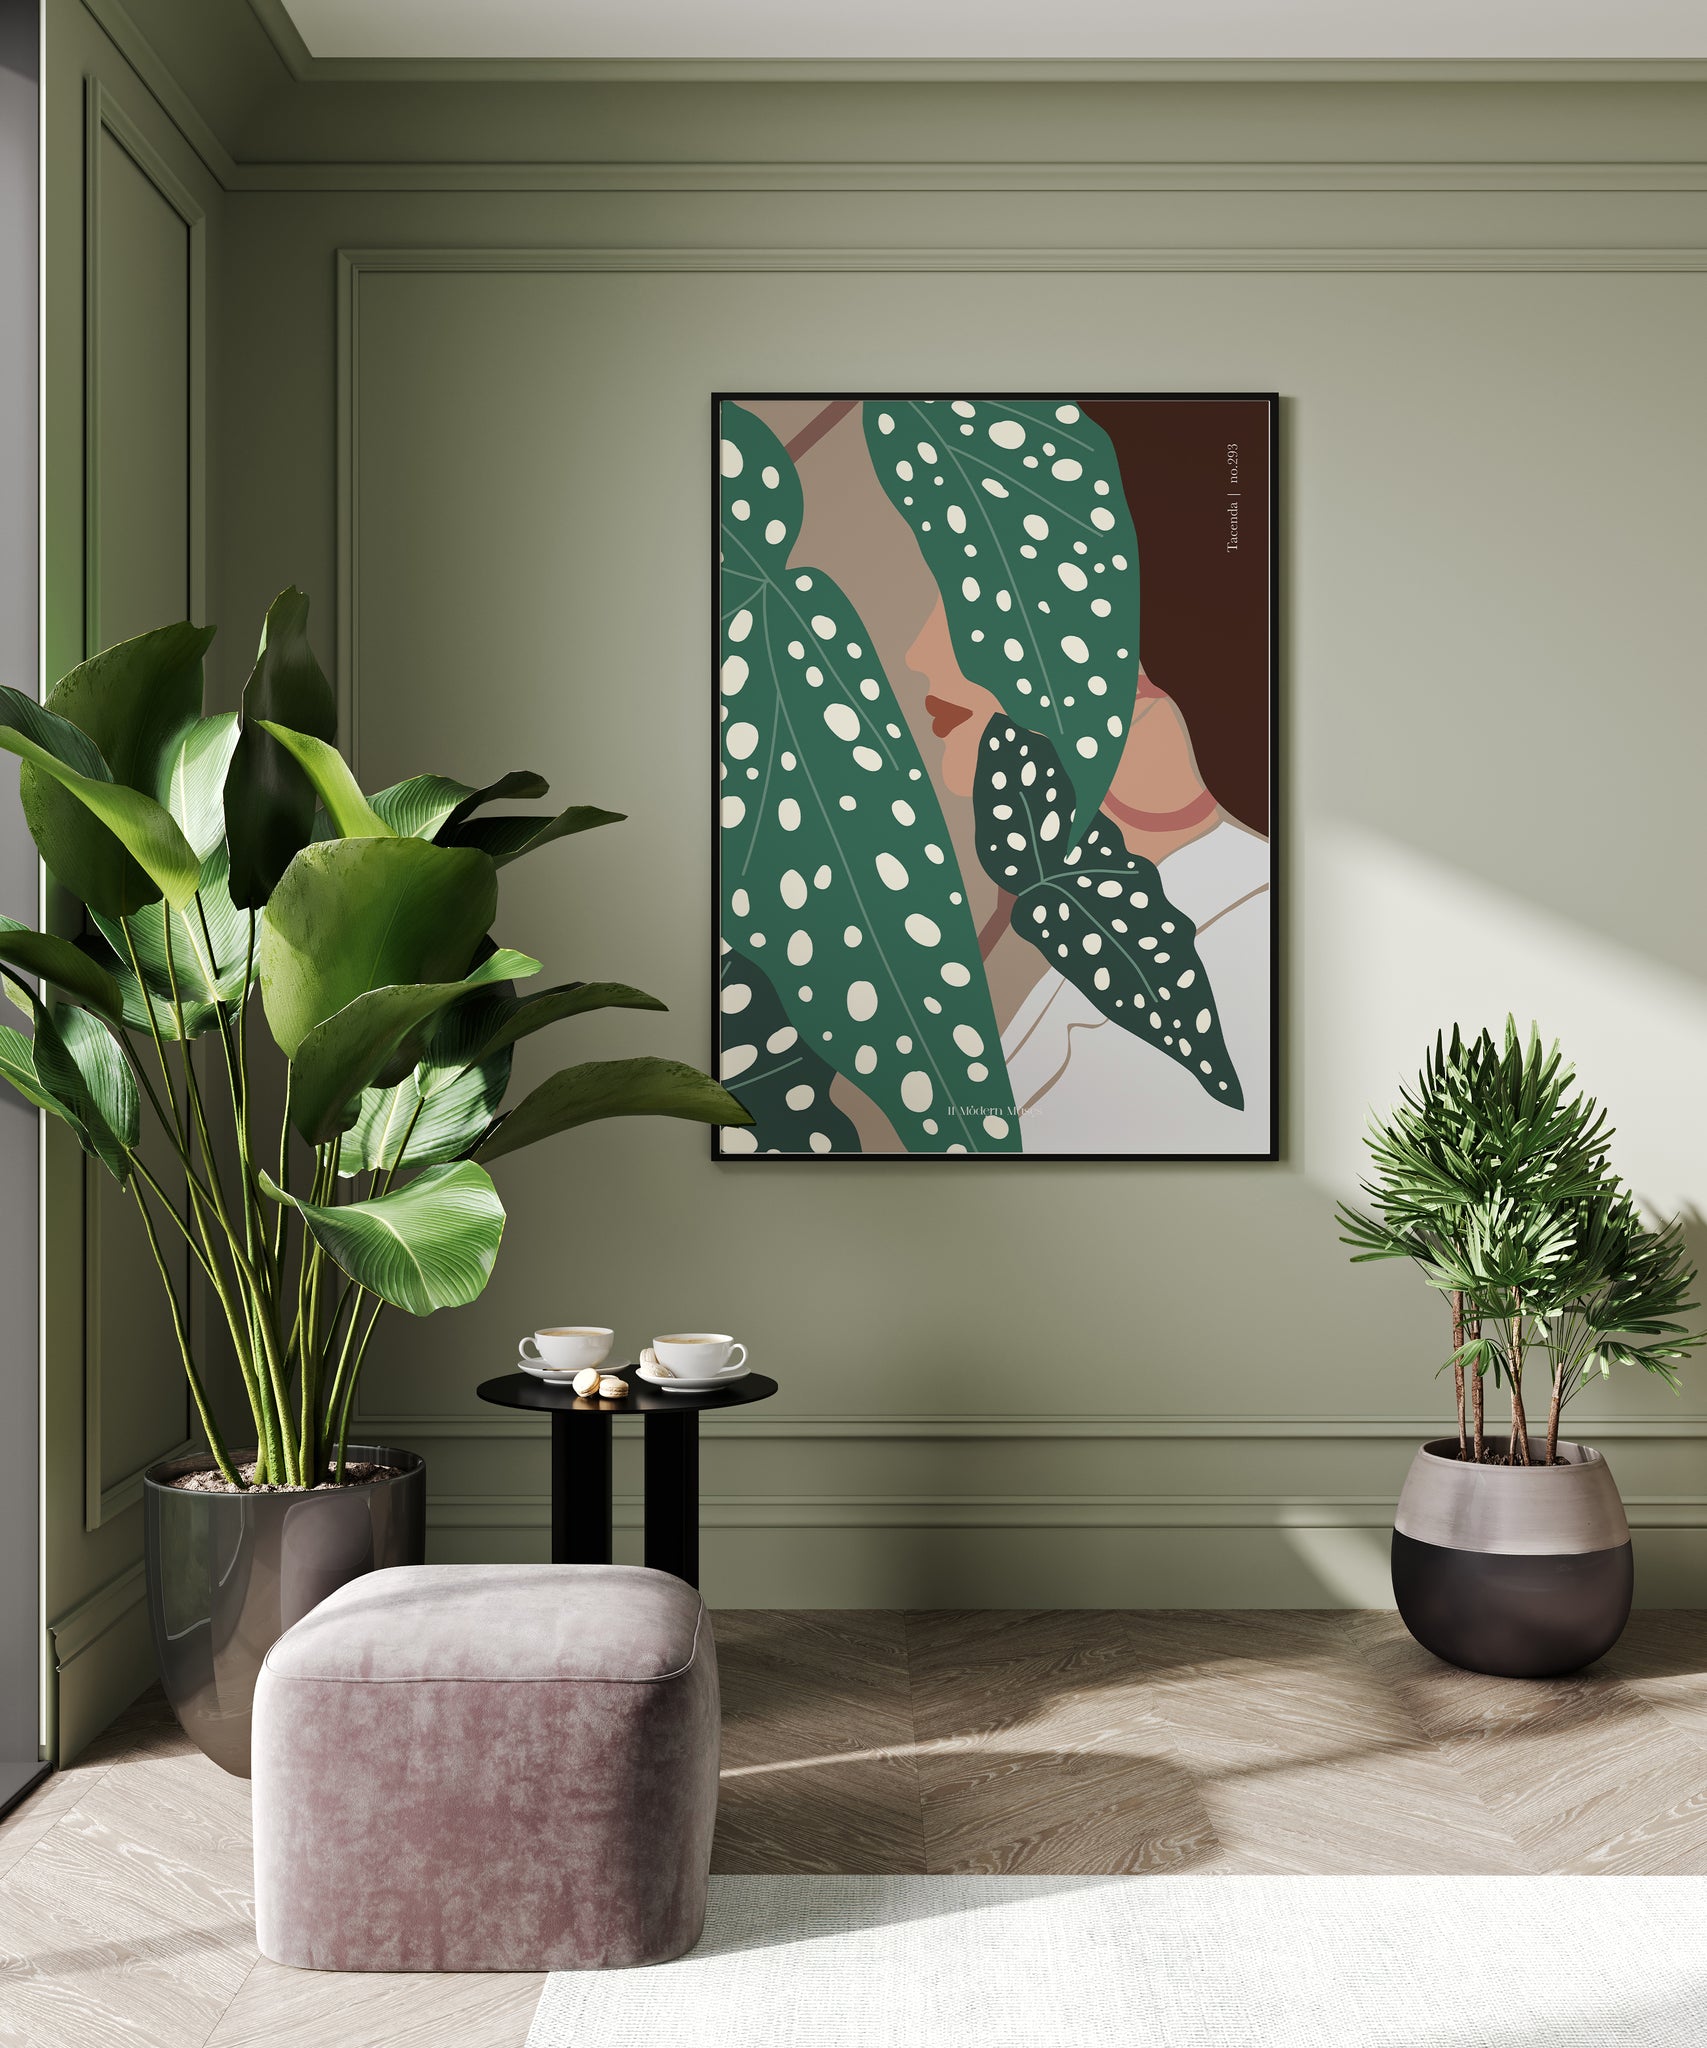 tacenda. Girls and plants wall art gallery walls. designed by 11 Modern Muses from Greece.